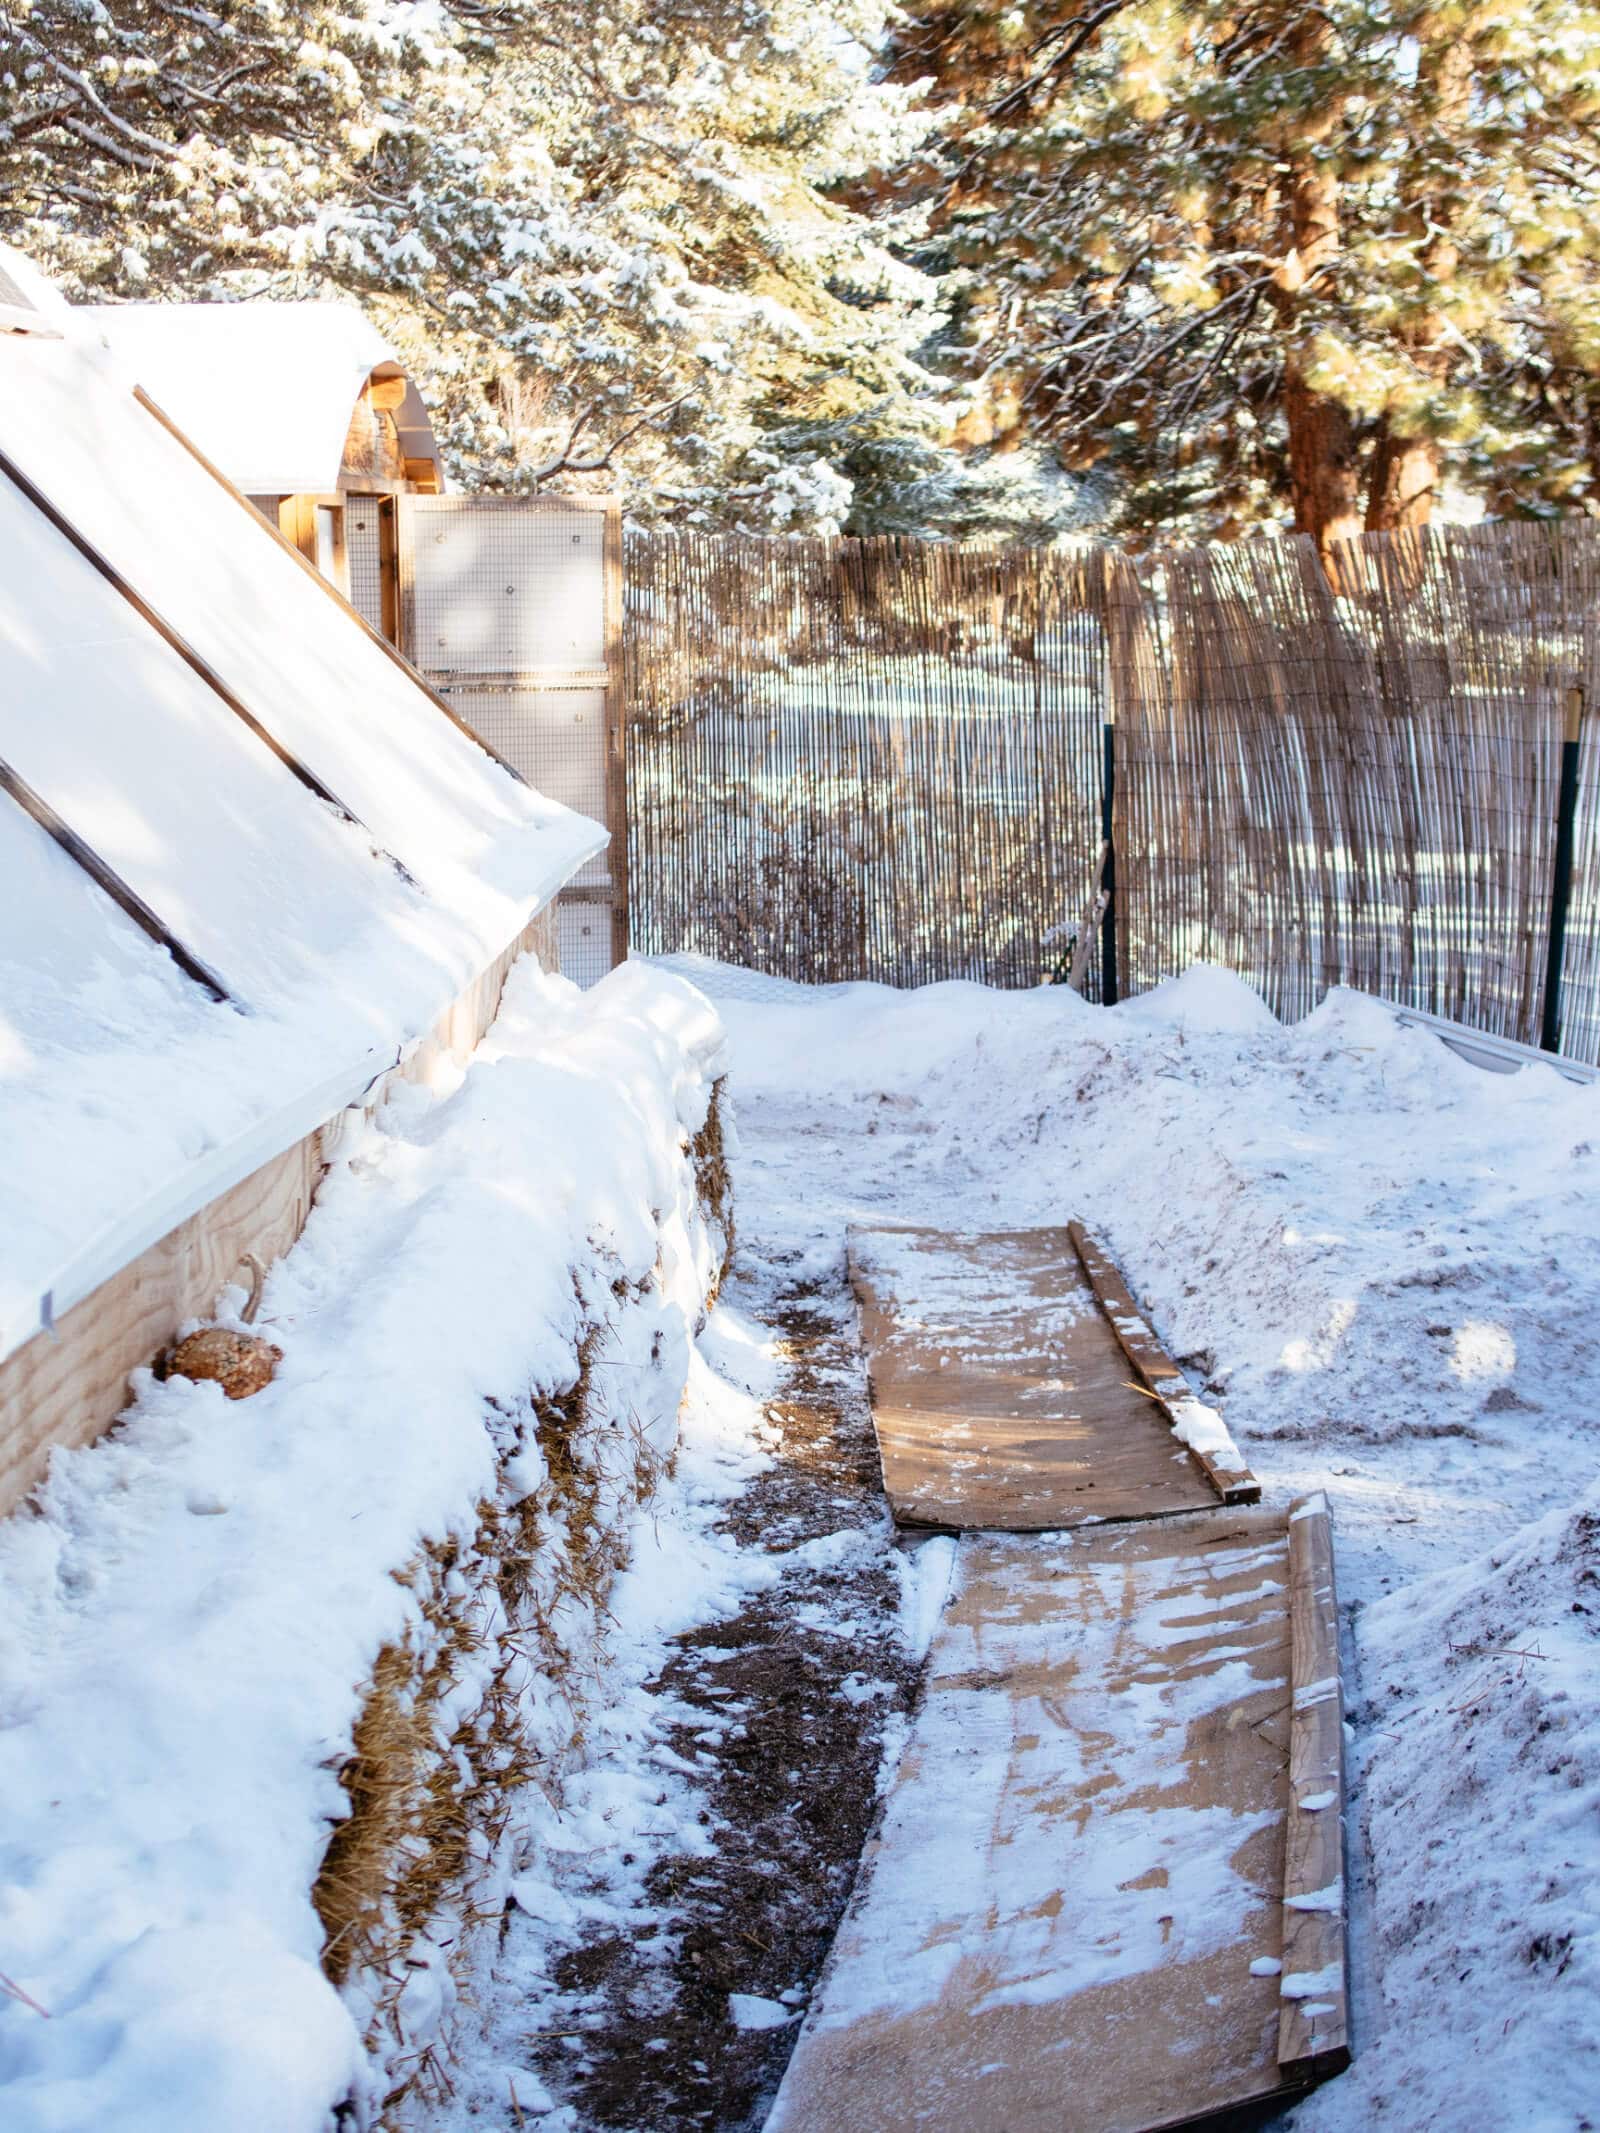 Shovel snow and clear a path for your chickens to roam